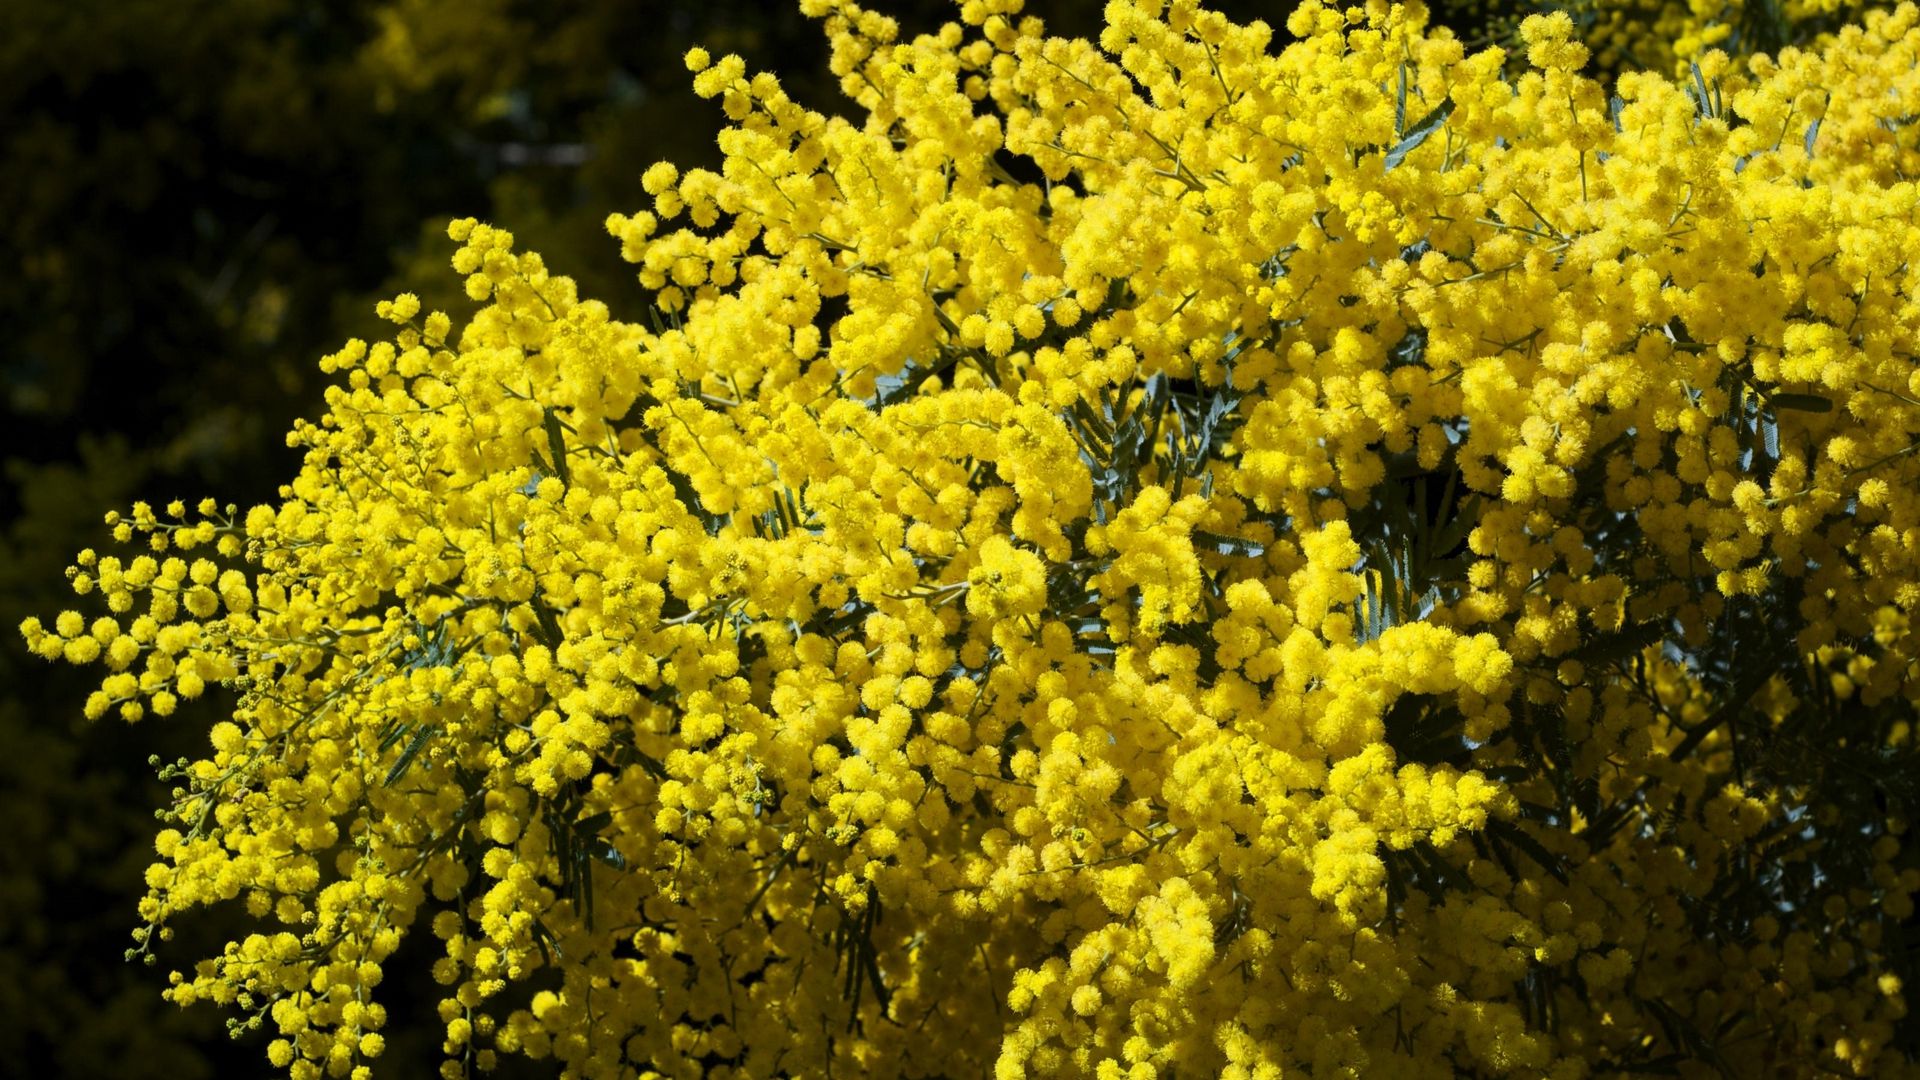 Download wallpaper 1920x1080 mimosa, branches, bushes, fluffy, bright, spring full hd, hdtv, fhd, 1080p HD background